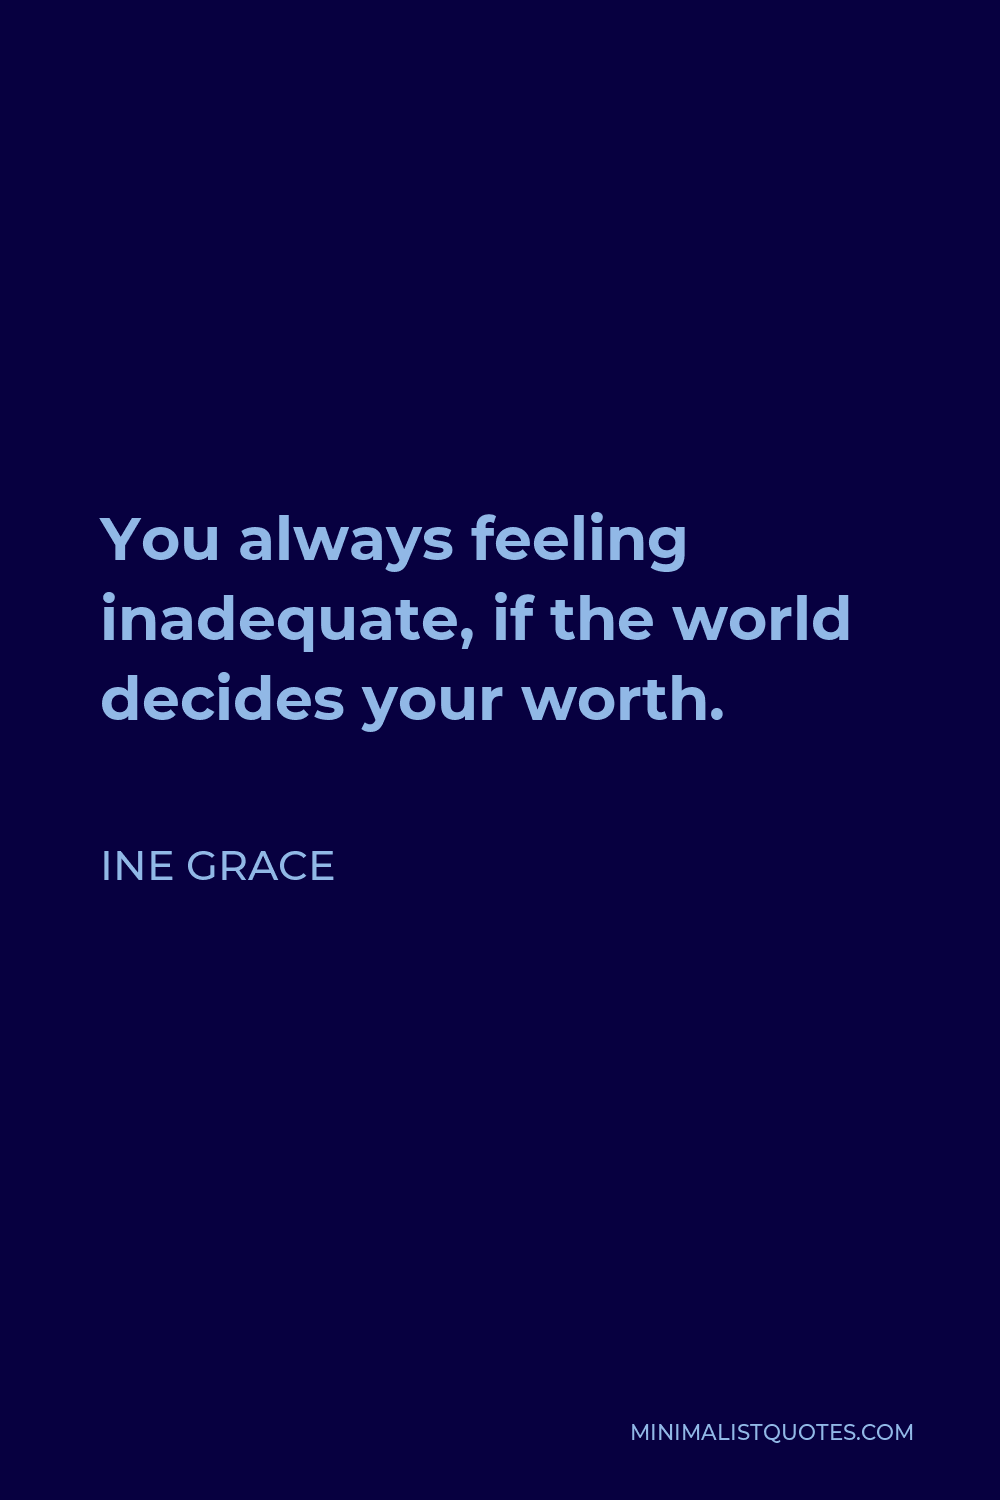 Ine Grace Quote - You always feeling inadequate, if the world decides your worth.